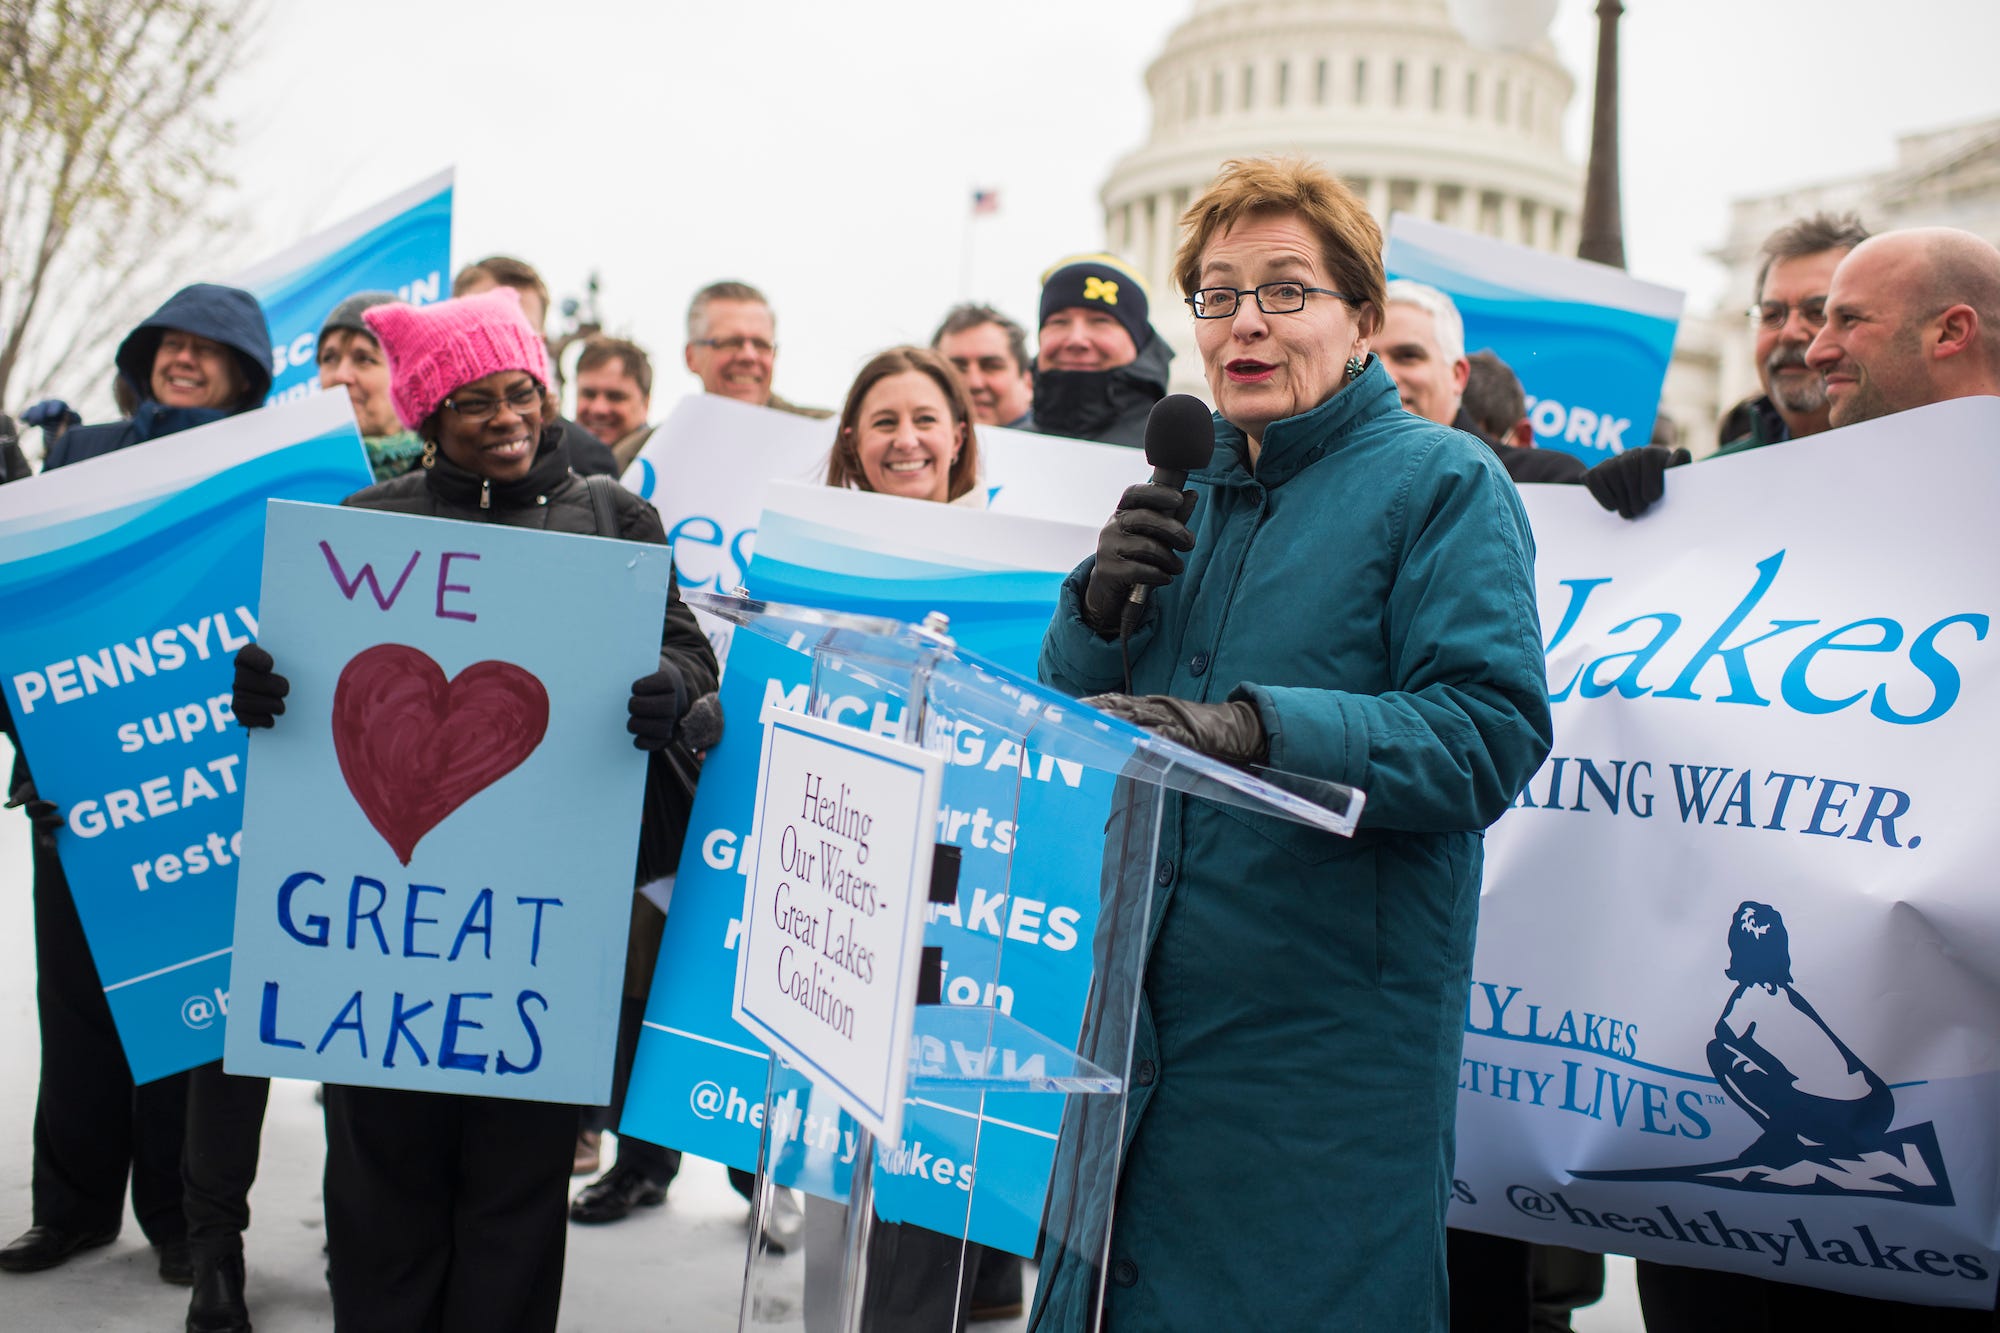 Democratic Rep. Marcy Kaptur of Ohio, wearing a long coat on what looks to be a chilly day in DC, addresses a group of sign-waving environmentalists gathered for a pro-Great Lakes restoration rally on Capitol Hill.